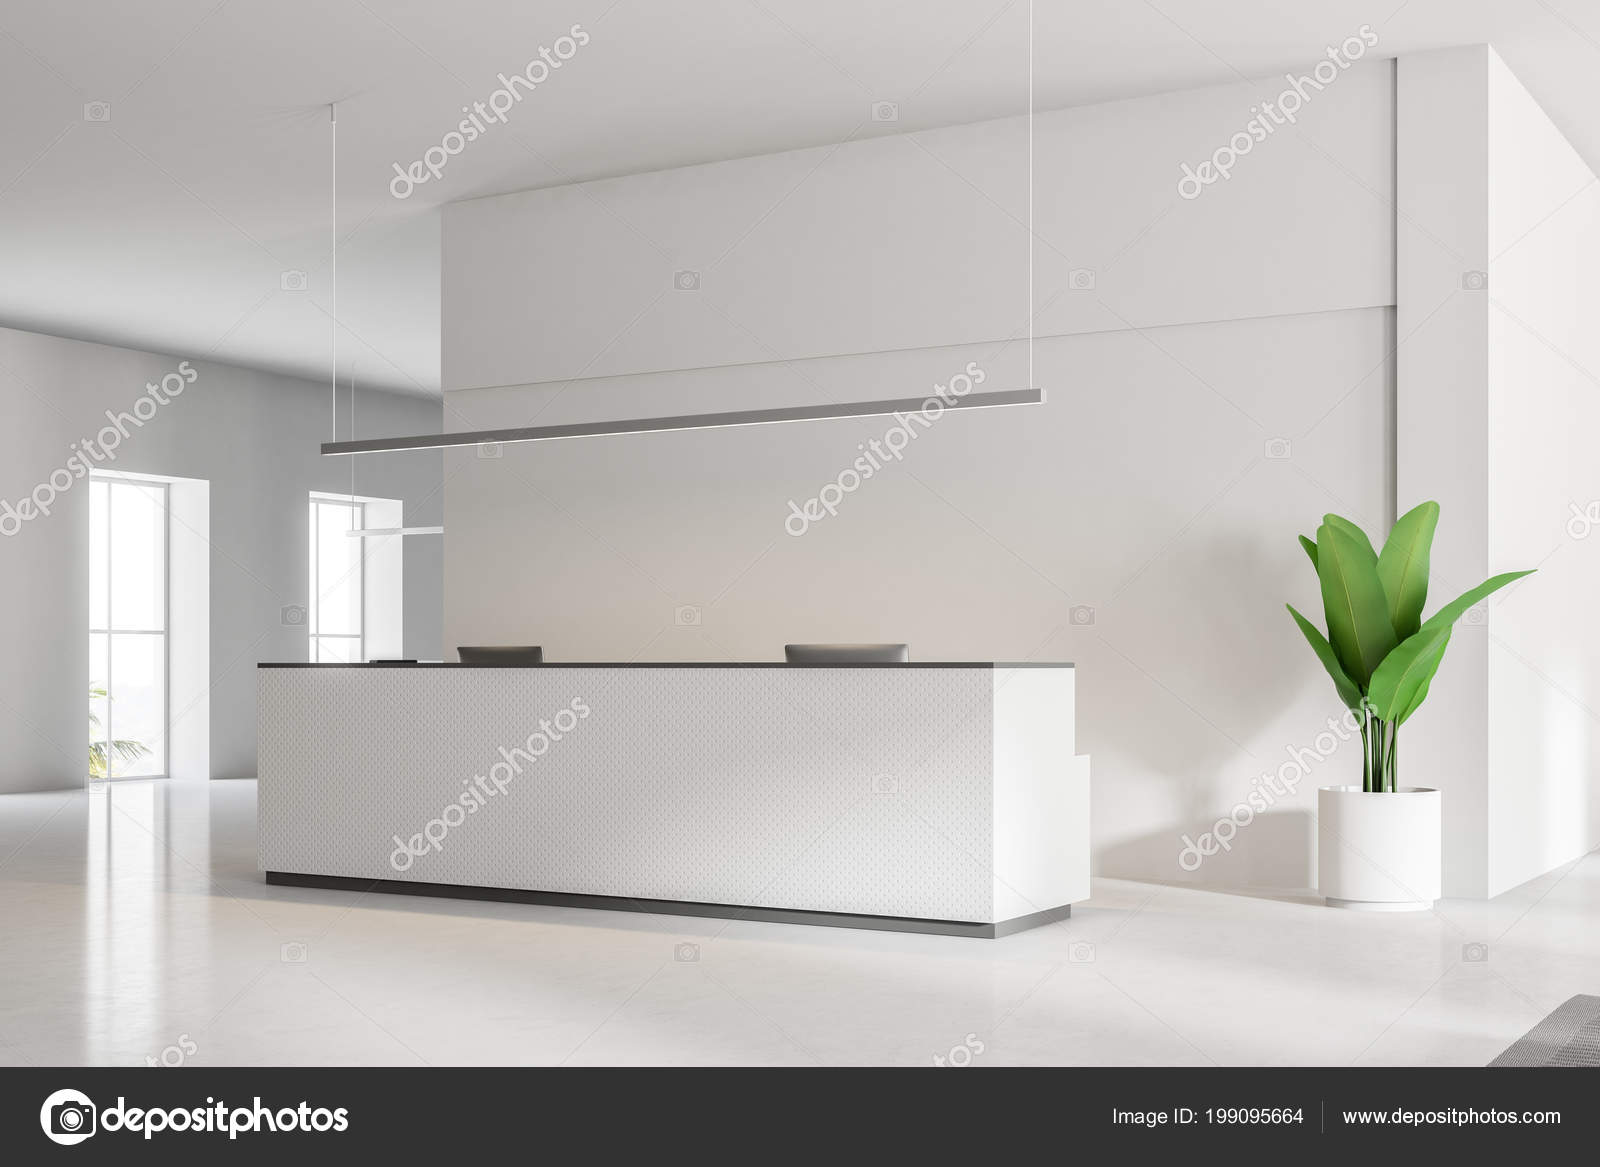 Download Modern White Office Reception Desk Two Computers Standing White Floor Stock Photo Image By C Denisismagilov 199095664